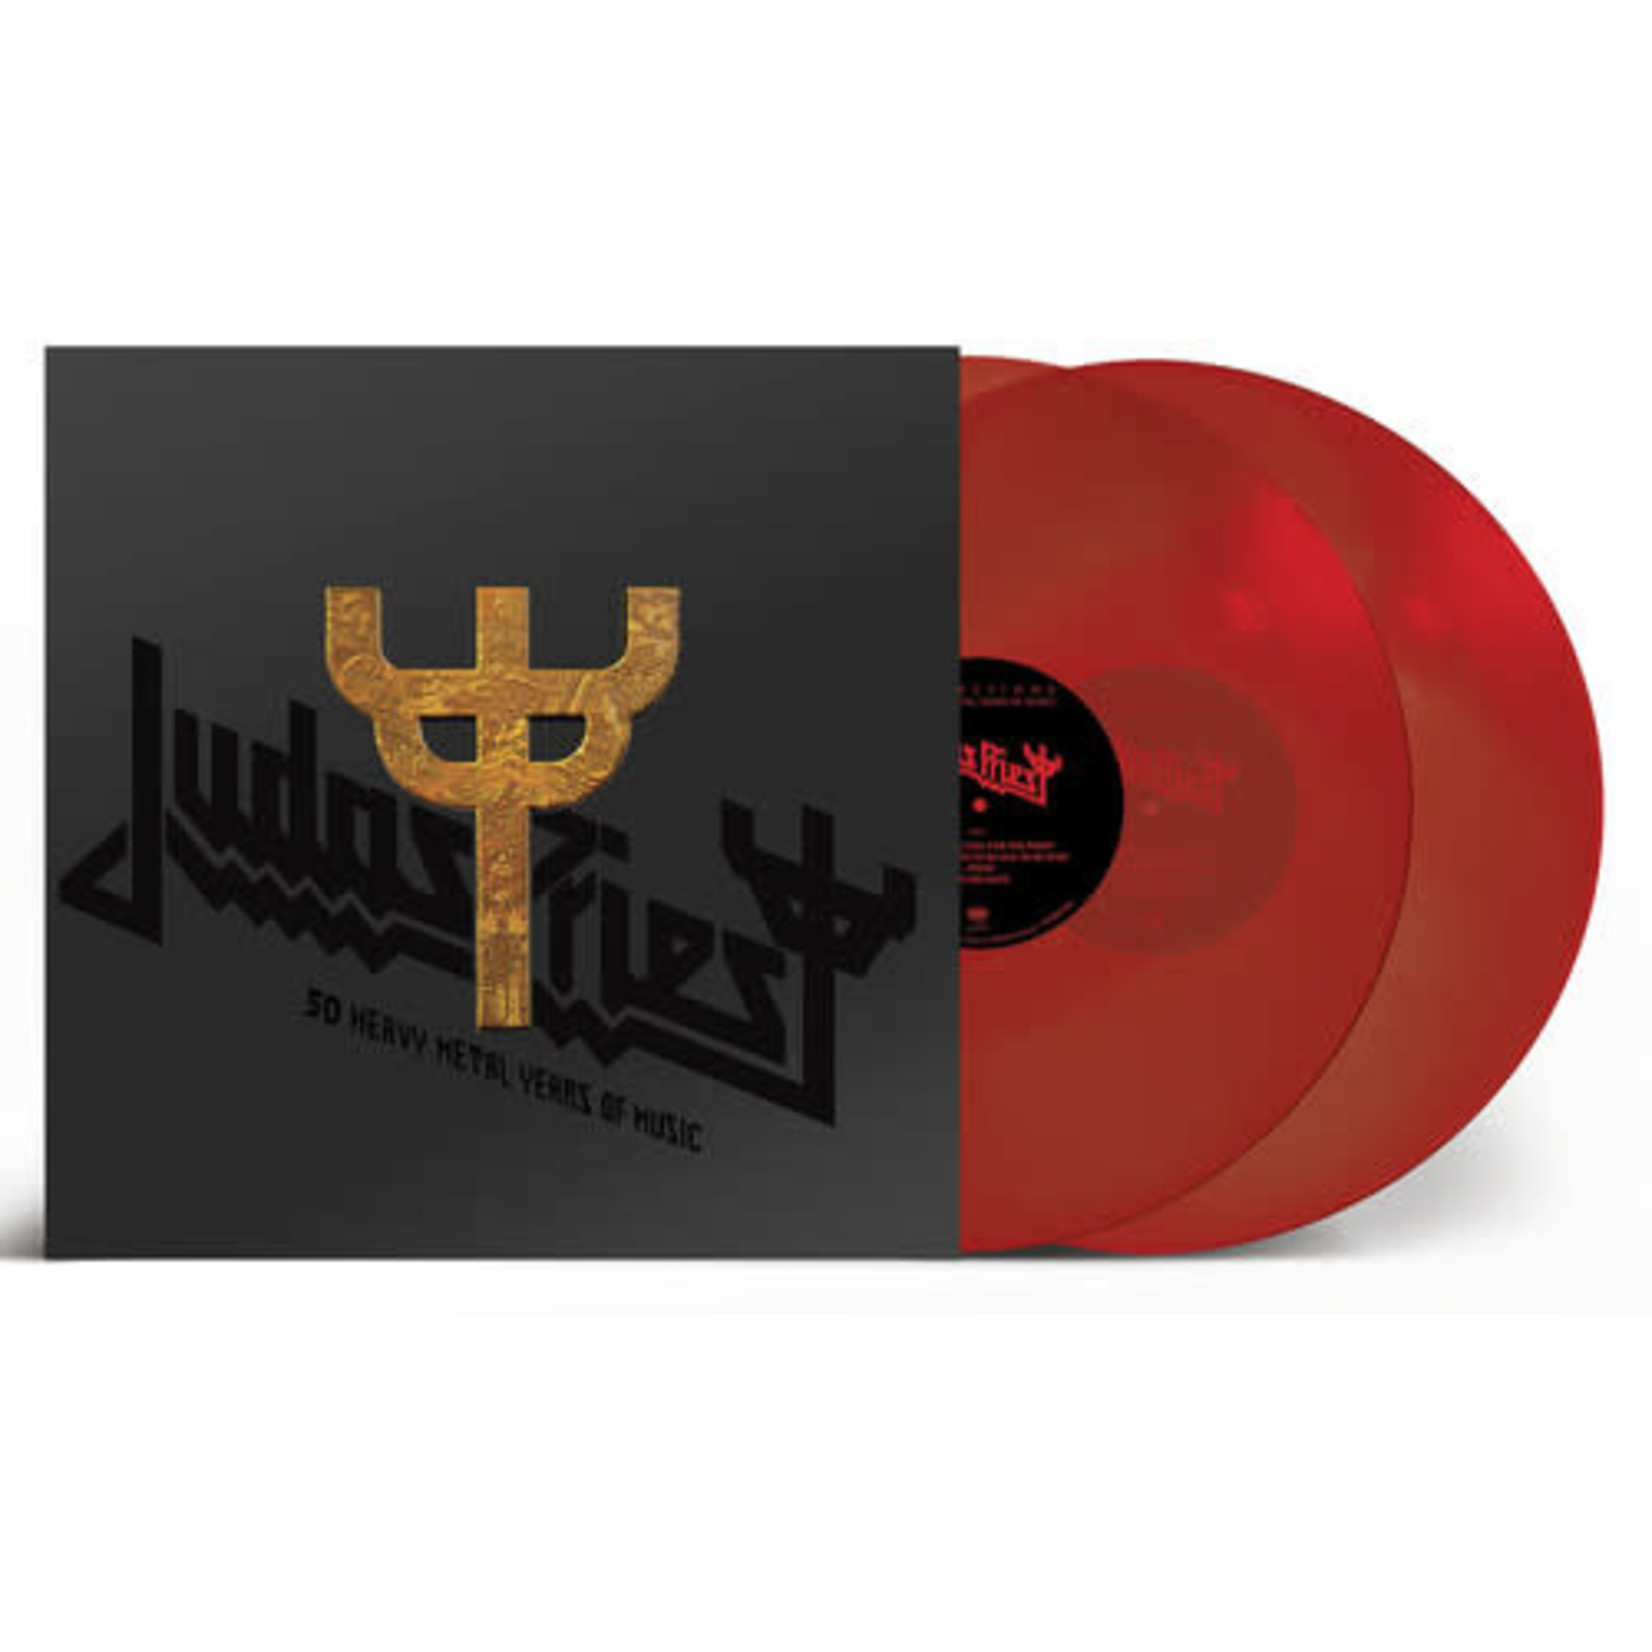 Sony Judas Priest - Reflections: 50 Heavy Metal Years of Music (2LP) [Red]